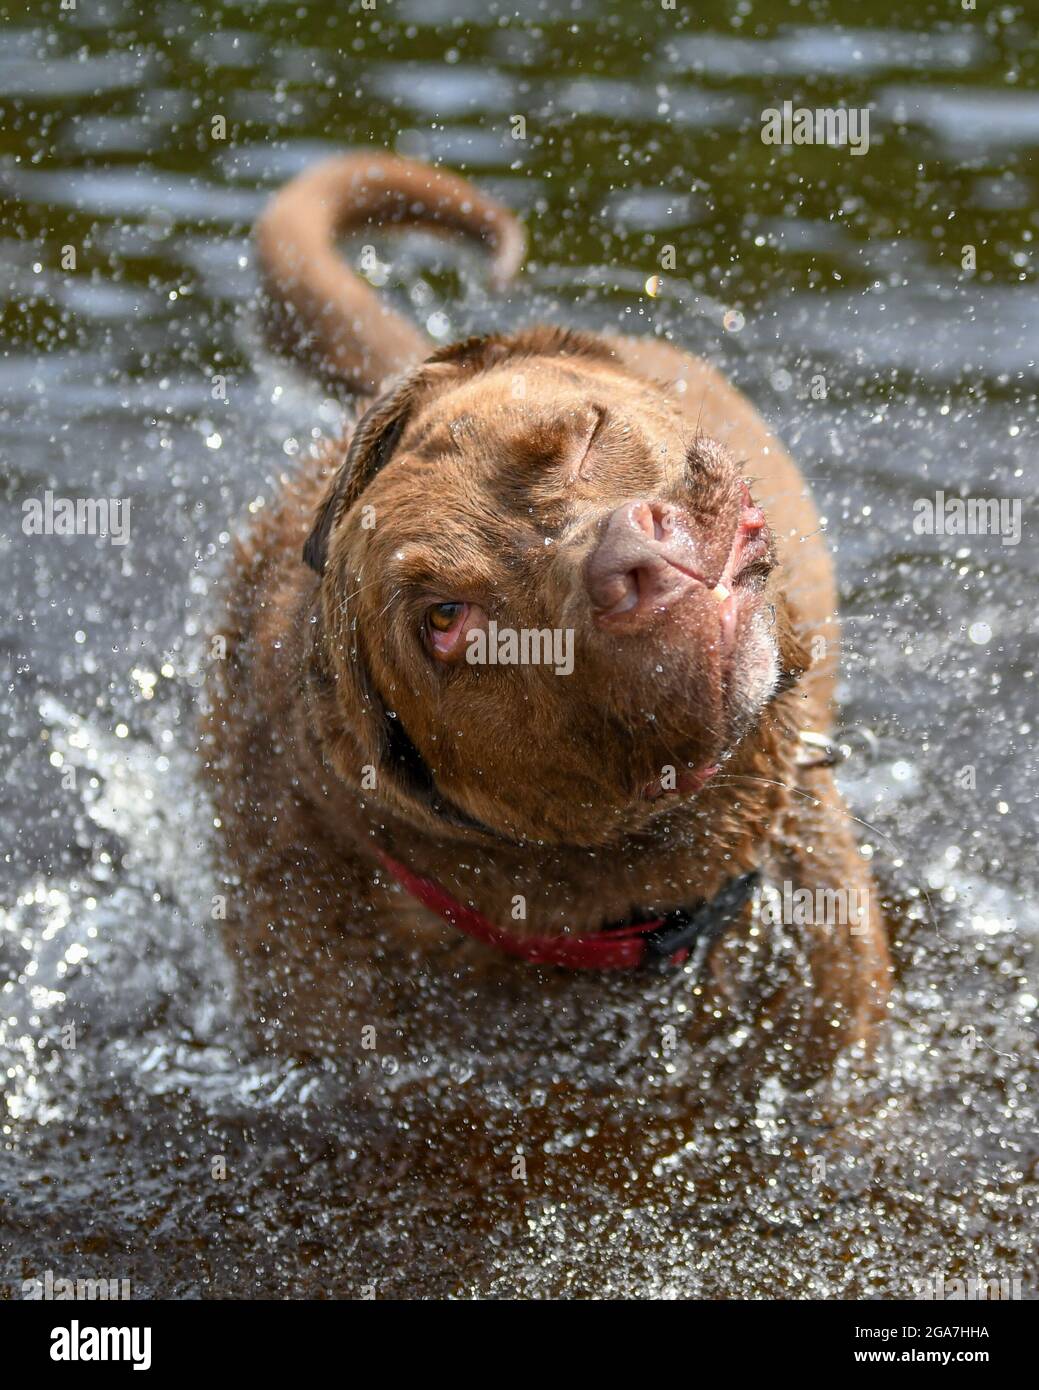 Crazy dog / silly dog shaking off water - silly face with wild eyes and strange expression Stock Photo